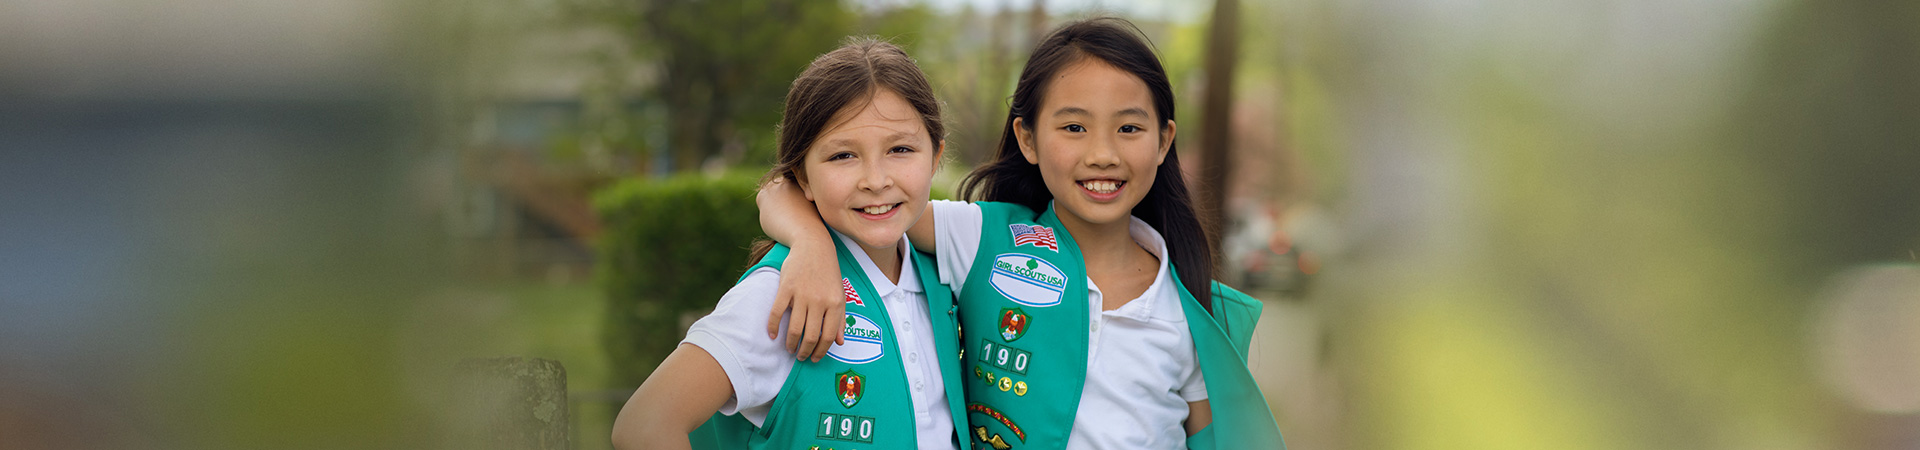  All About Girl Scouts 